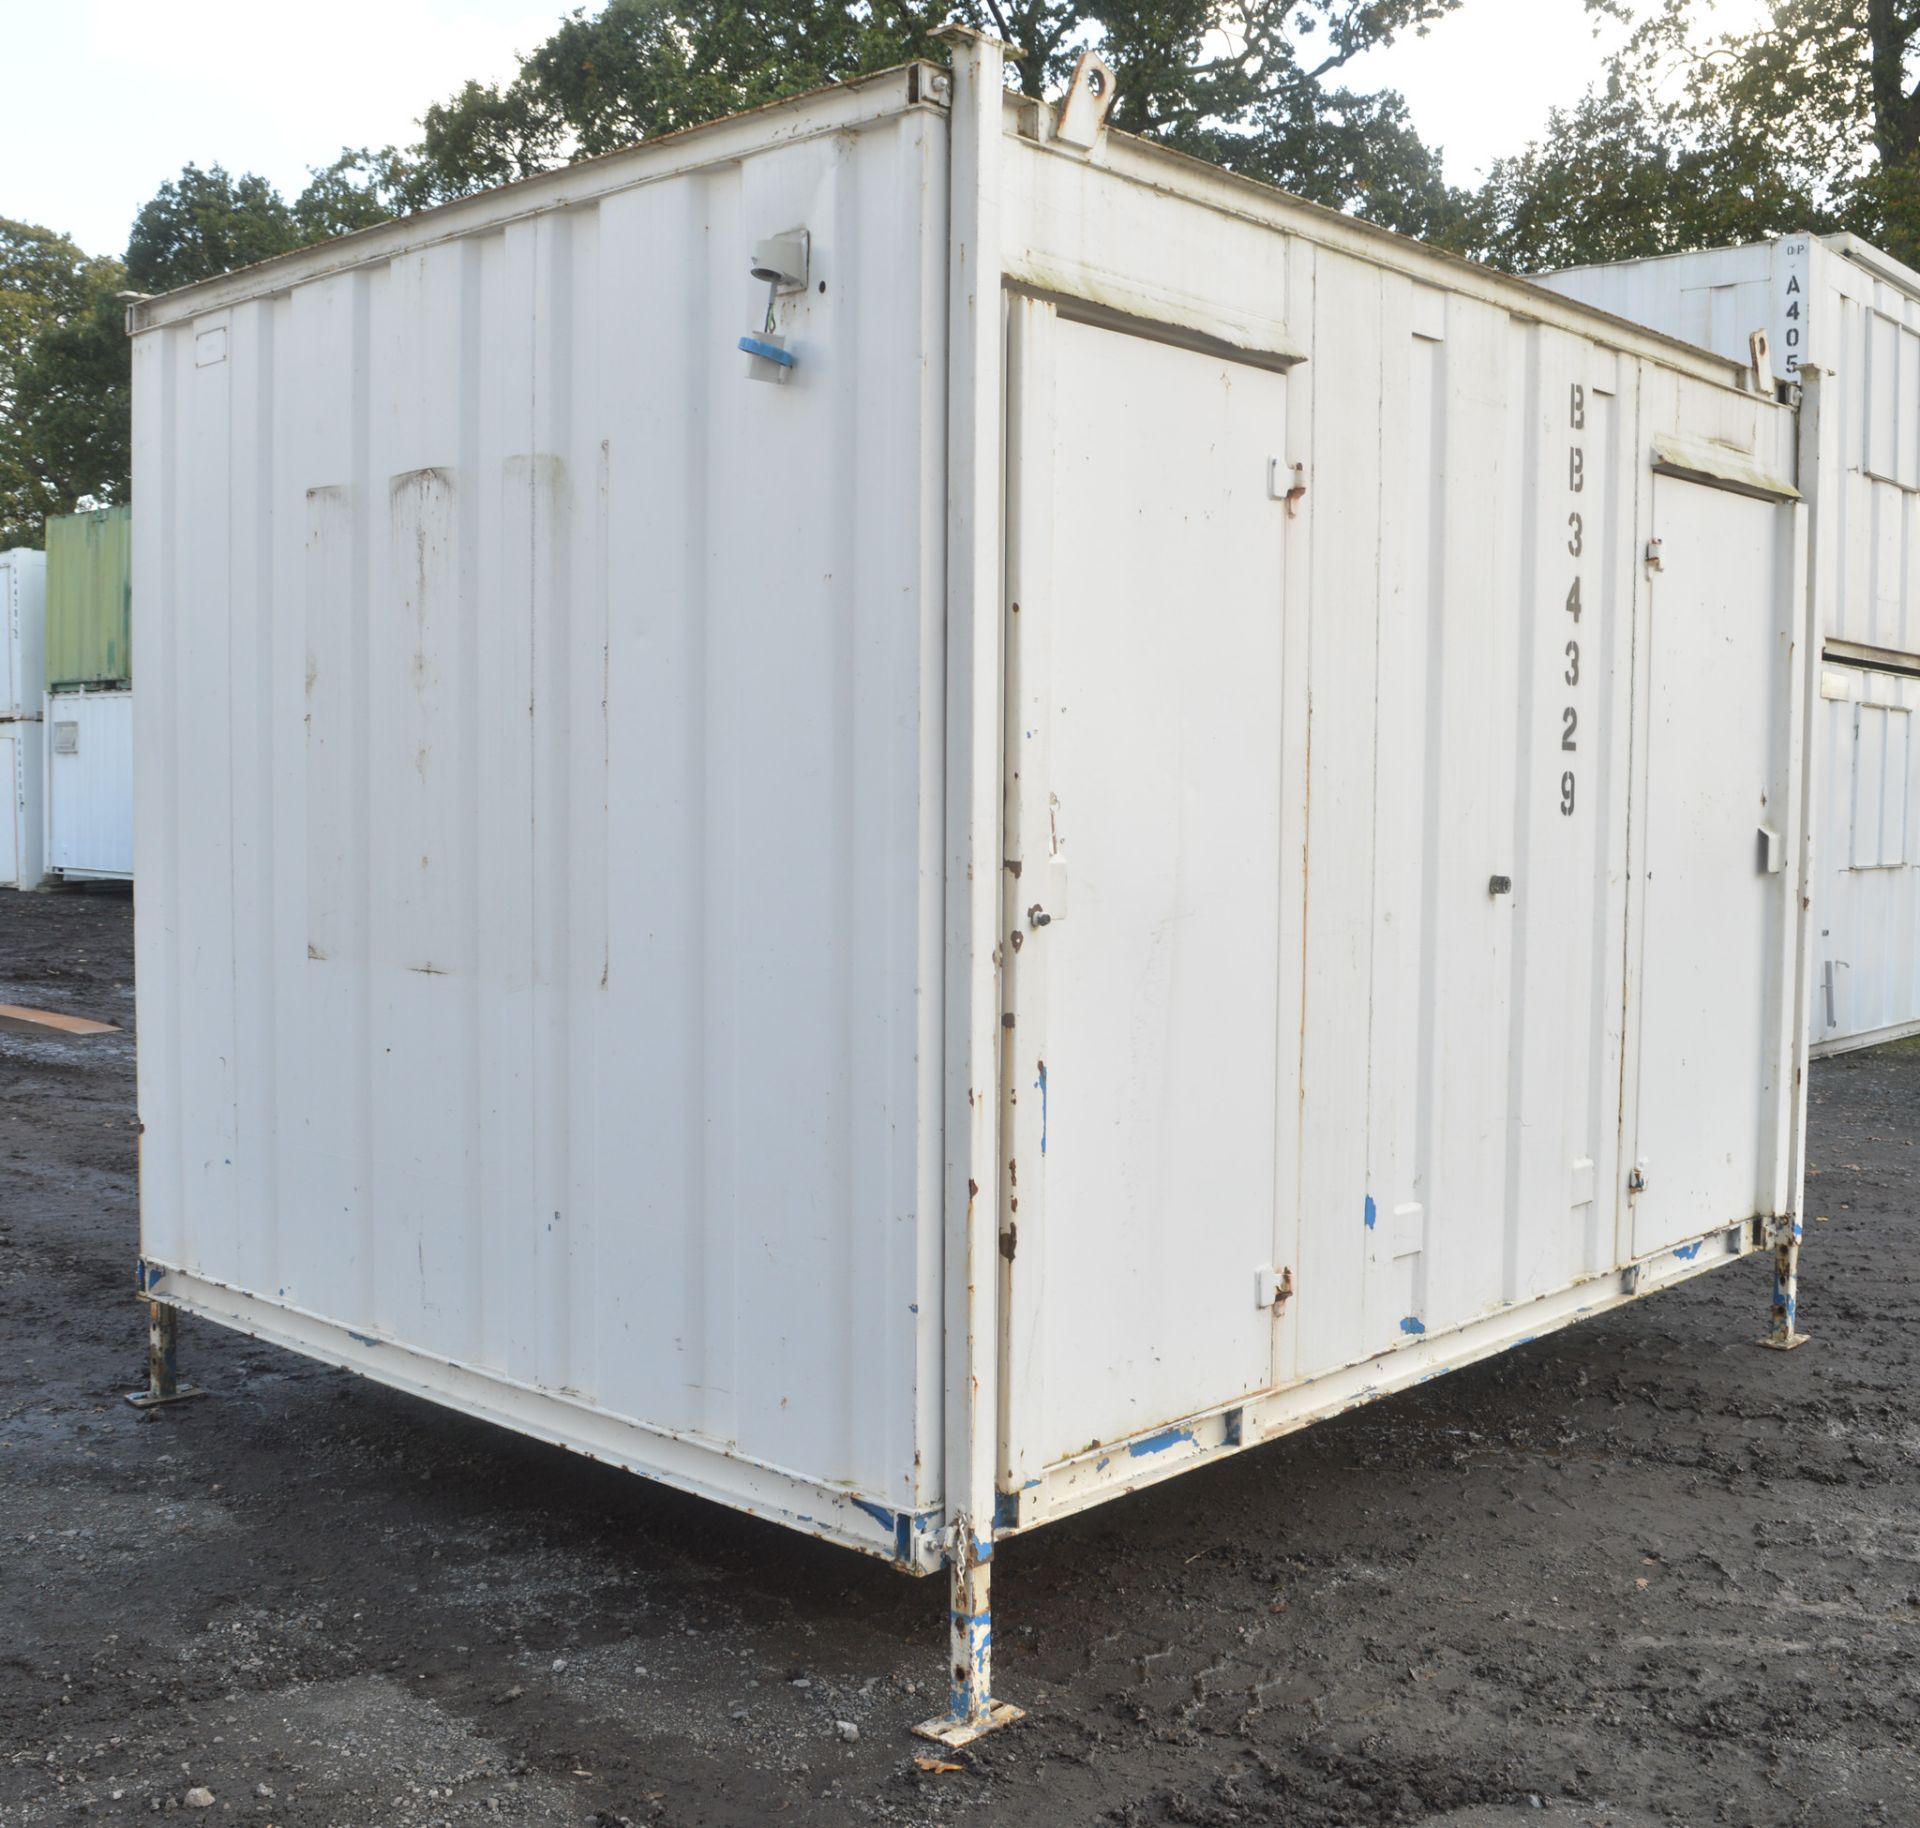 12 ft x 8 ft jack leg steel anti vandal toilet block  Comprising 2 cubicle toilets, 2 urinals and - Image 3 of 8